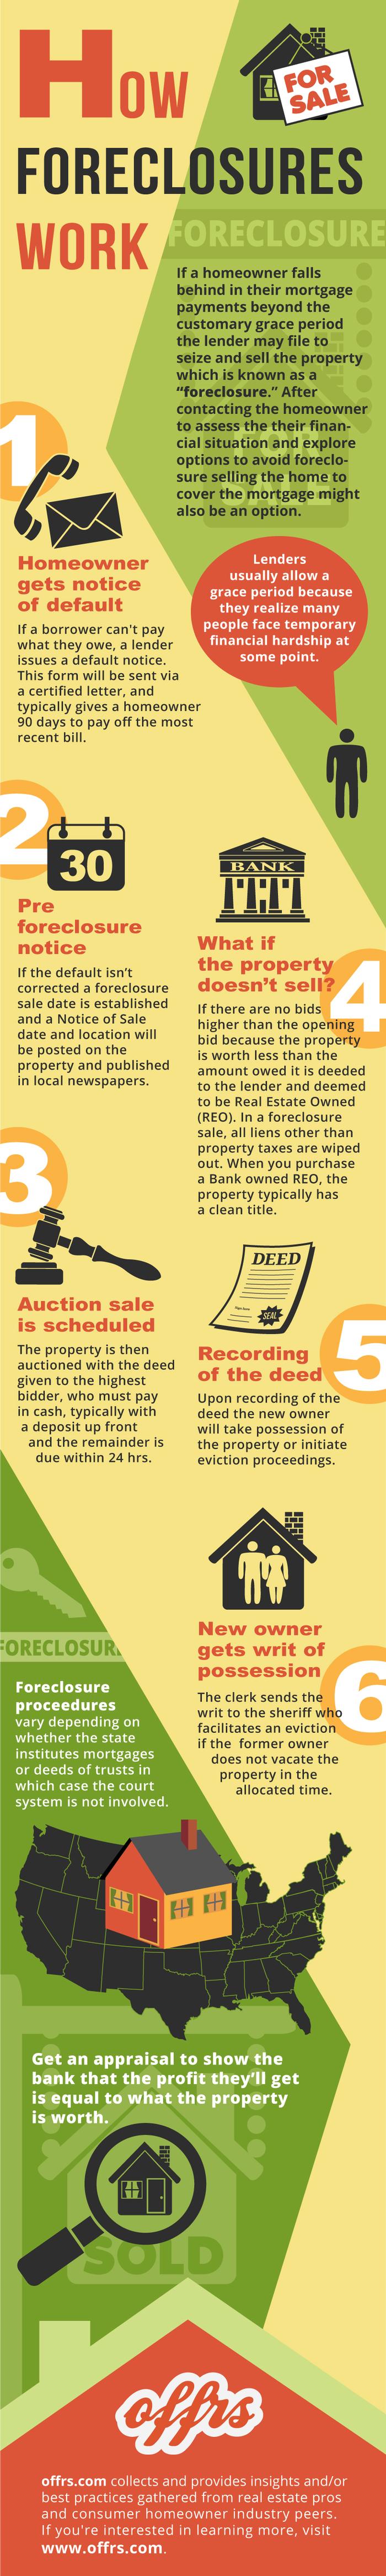 How Foreclosures Work (a visual guide for homeowners and agents by offrs)